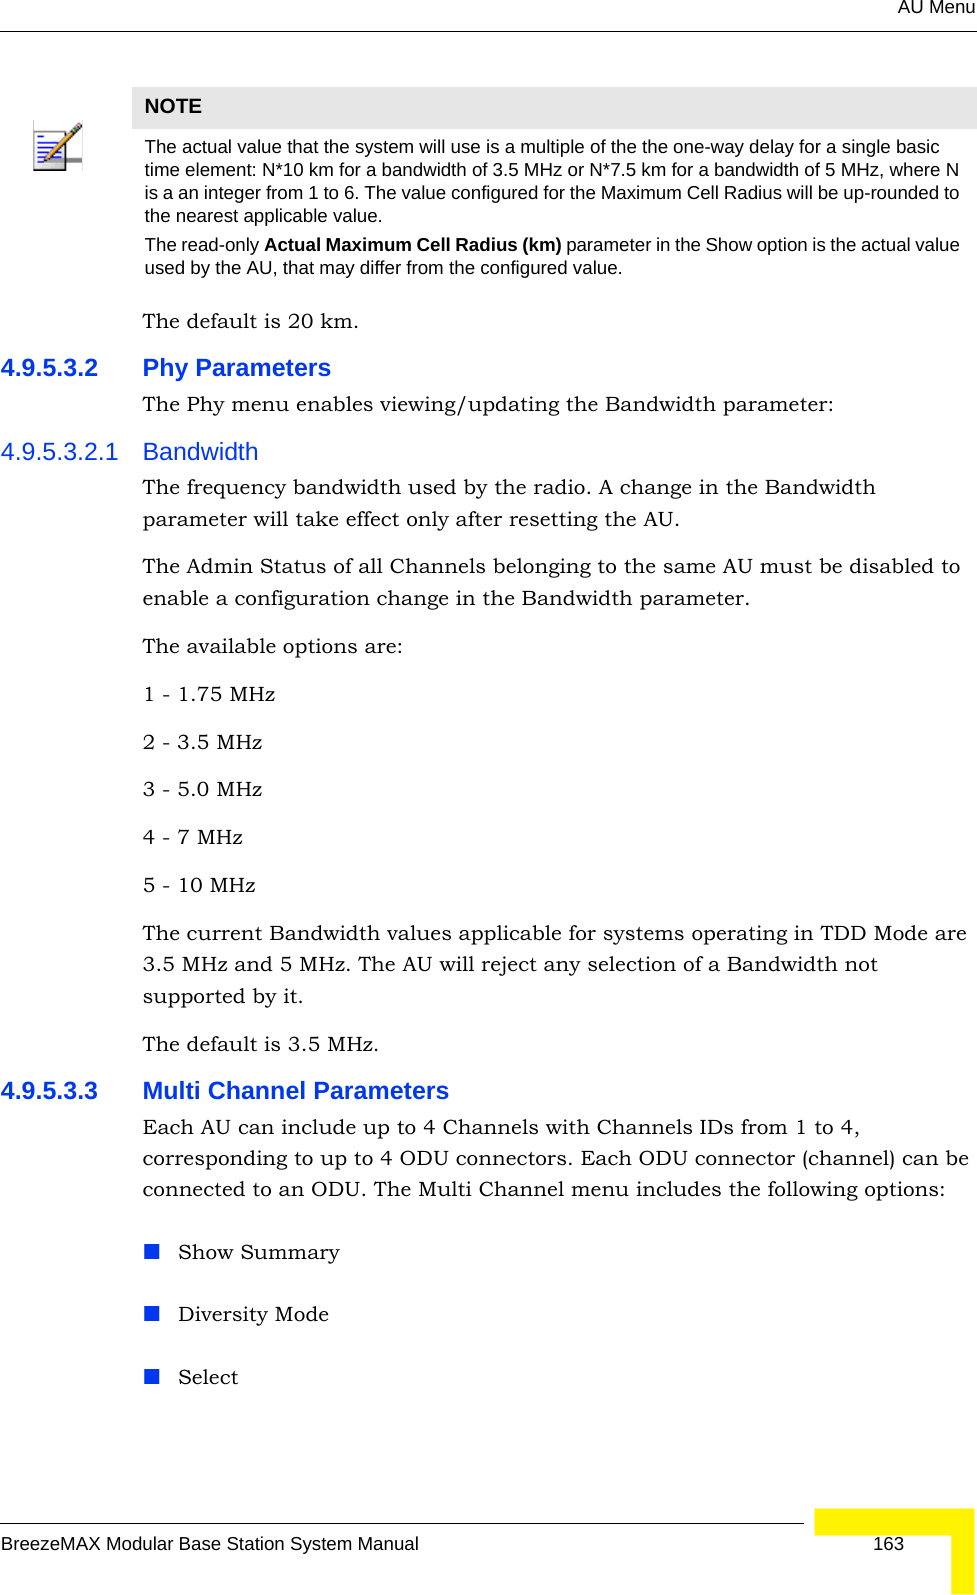 AU MenuBreezeMAX Modular Base Station System Manual 163The default is 20 km.4.9.5.3.2 Phy ParametersThe Phy menu enables viewing/updating the Bandwidth parameter:4.9.5.3.2.1 BandwidthThe frequency bandwidth used by the radio. A change in the Bandwidth parameter will take effect only after resetting the AU.The Admin Status of all Channels belonging to the same AU must be disabled to enable a configuration change in the Bandwidth parameter.The available options are:1 - 1.75 MHz2 - 3.5 MHz3 - 5.0 MHz4 - 7 MHz5 - 10 MHzThe current Bandwidth values applicable for systems operating in TDD Mode are 3.5 MHz and 5 MHz. The AU will reject any selection of a Bandwidth not supported by it.The default is 3.5 MHz.4.9.5.3.3 Multi Channel ParametersEach AU can include up to 4 Channels with Channels IDs from 1 to 4, corresponding to up to 4 ODU connectors. Each ODU connector (channel) can be connected to an ODU. The Multi Channel menu includes the following options:Show SummaryDiversity ModeSelectNOTEThe actual value that the system will use is a multiple of the the one-way delay for a single basic time element: N*10 km for a bandwidth of 3.5 MHz or N*7.5 km for a bandwidth of 5 MHz, where N is a an integer from 1 to 6. The value configured for the Maximum Cell Radius will be up-rounded to the nearest applicable value.The read-only Actual Maximum Cell Radius (km) parameter in the Show option is the actual value used by the AU, that may differ from the configured value.